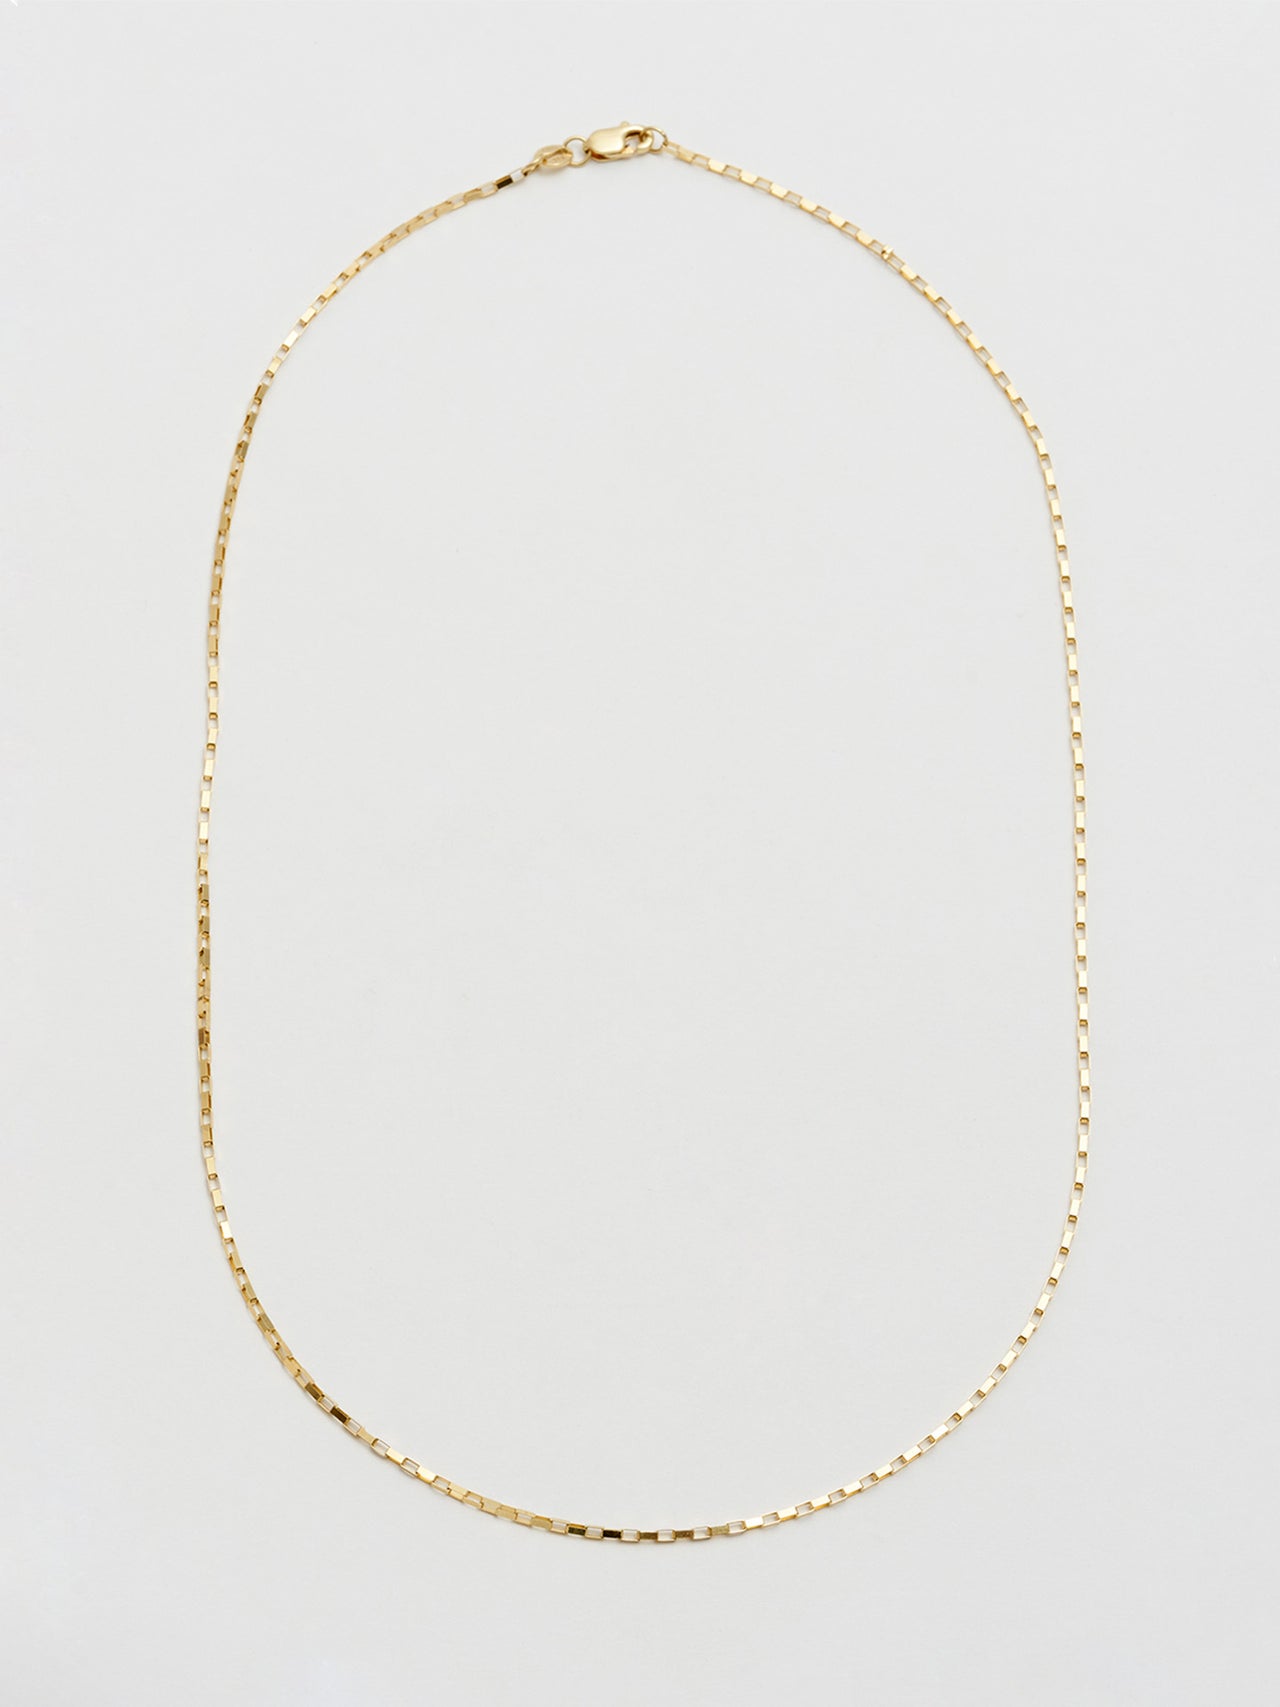 14Kt Yellow Gold Elongated Box Chain pictured on light grey background